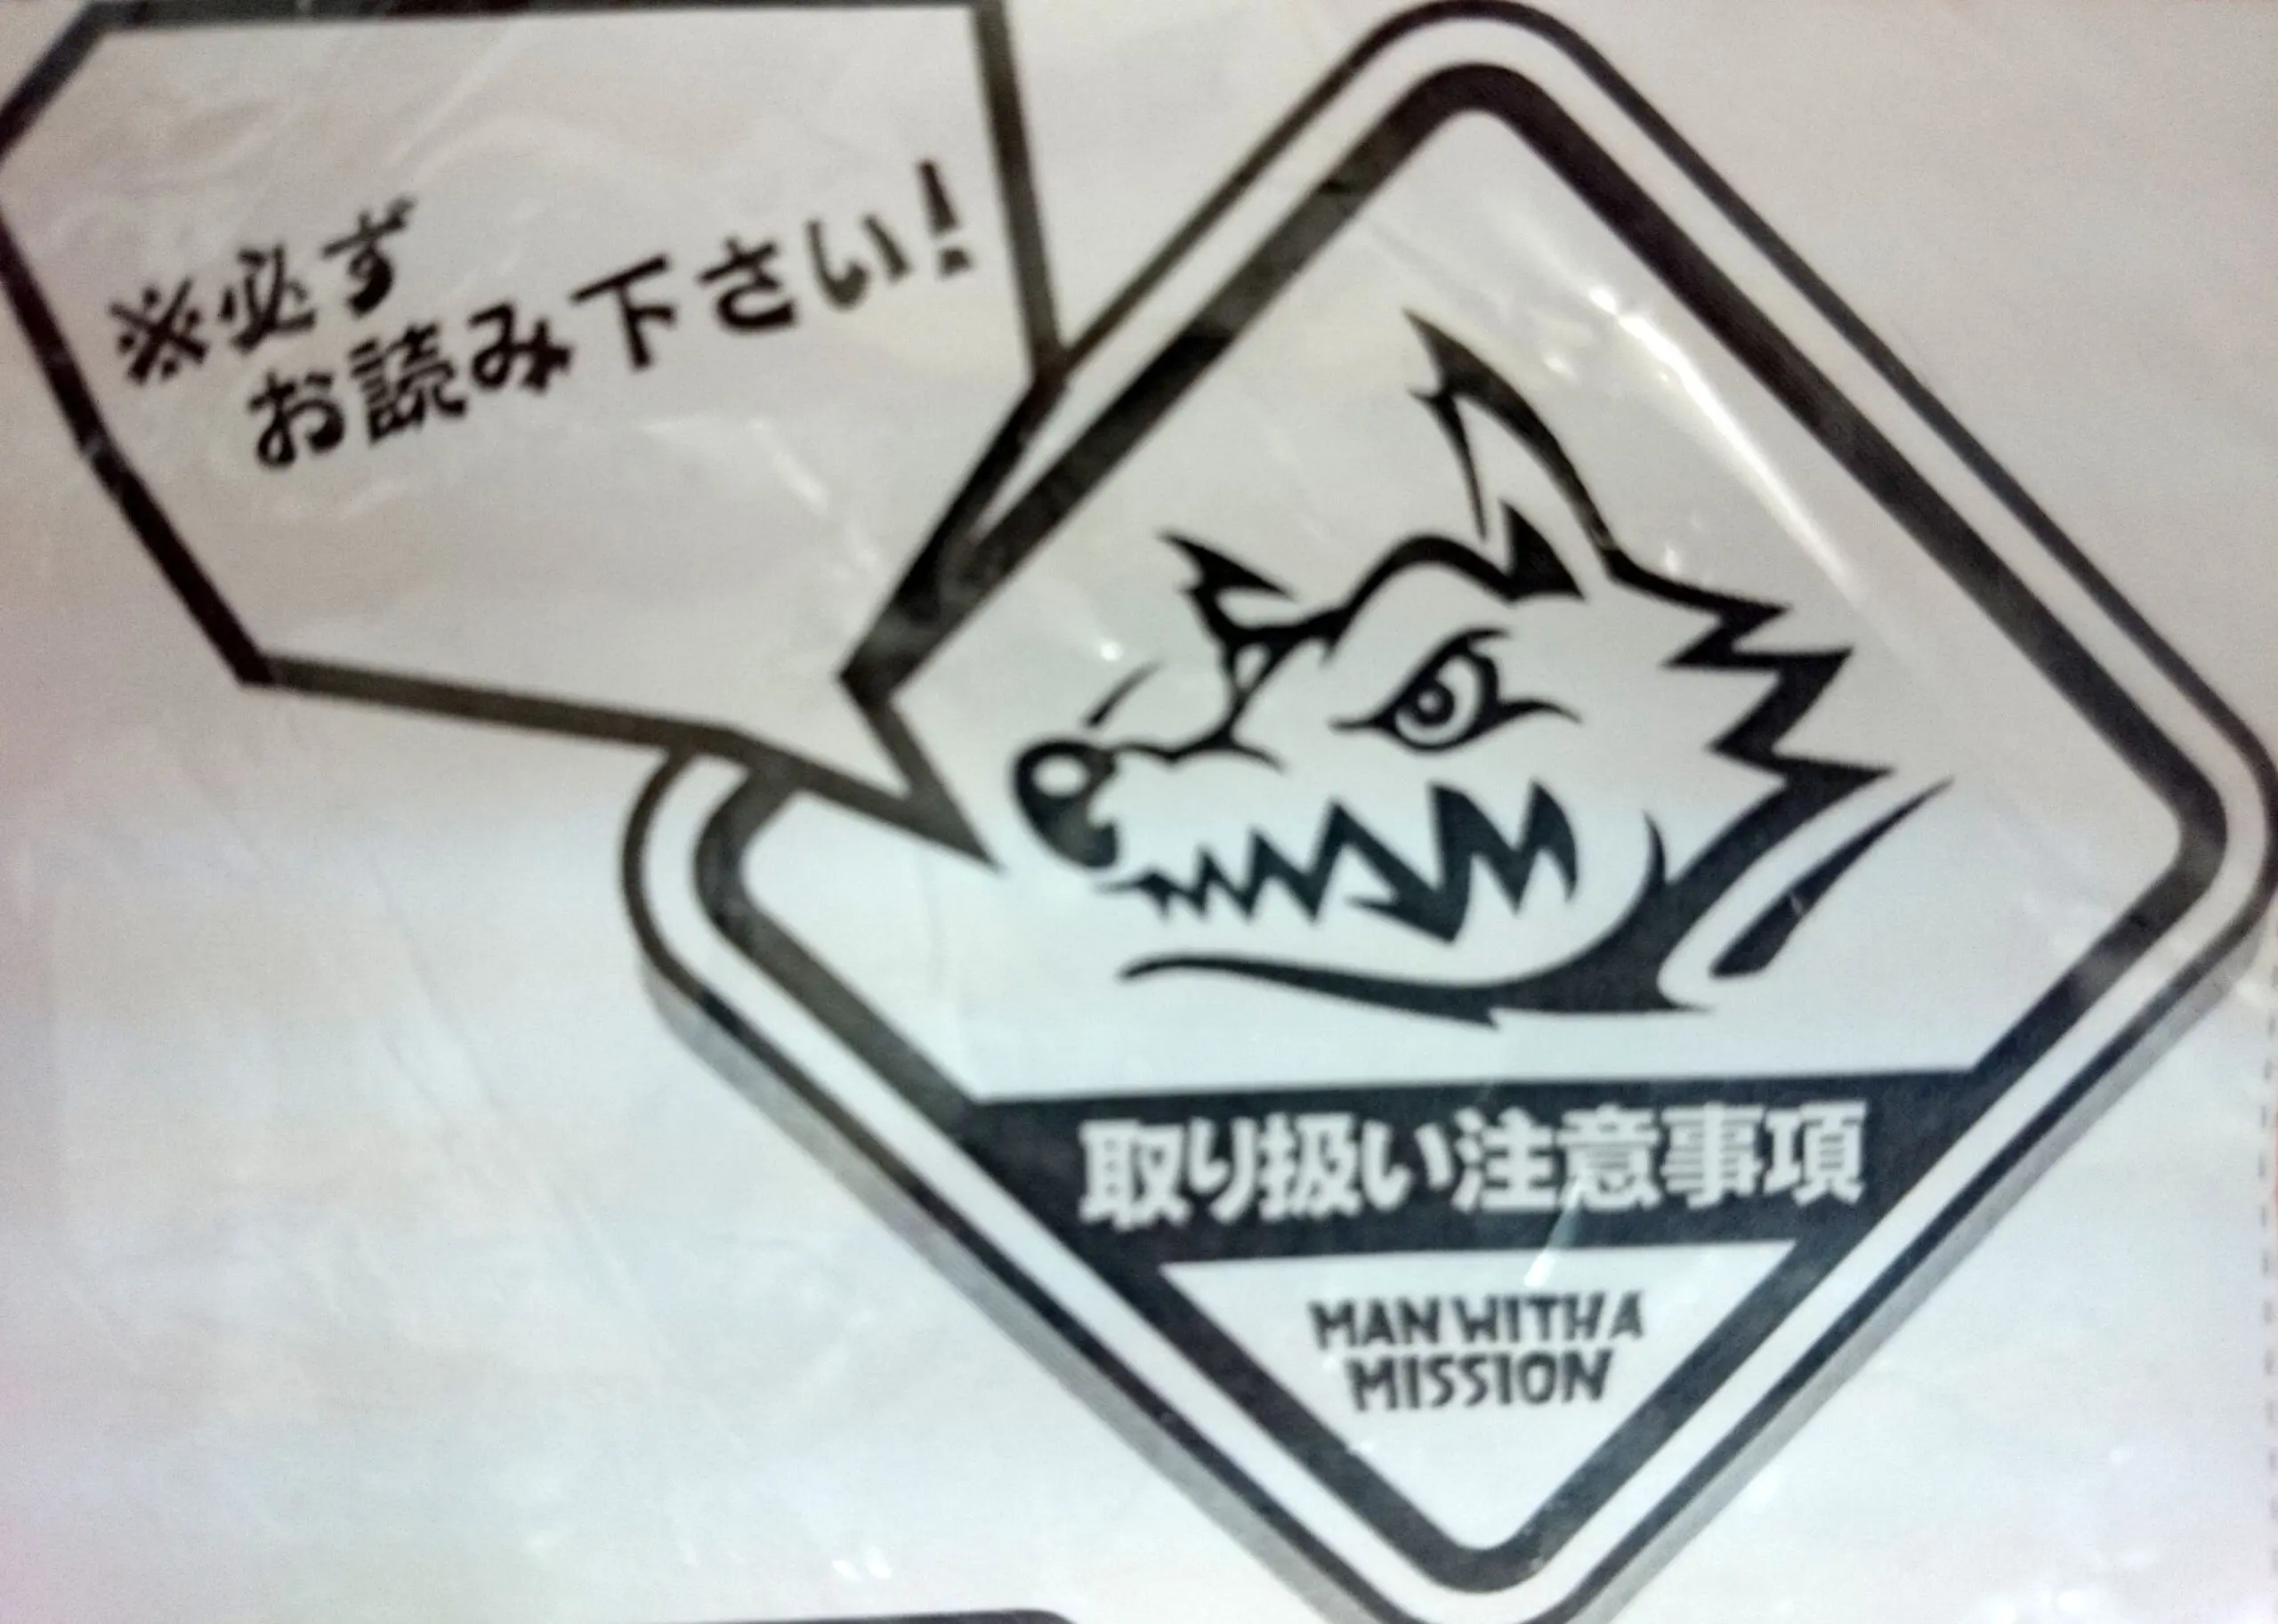 MAN WITH A MISSION A5生肉パーカー注意書き